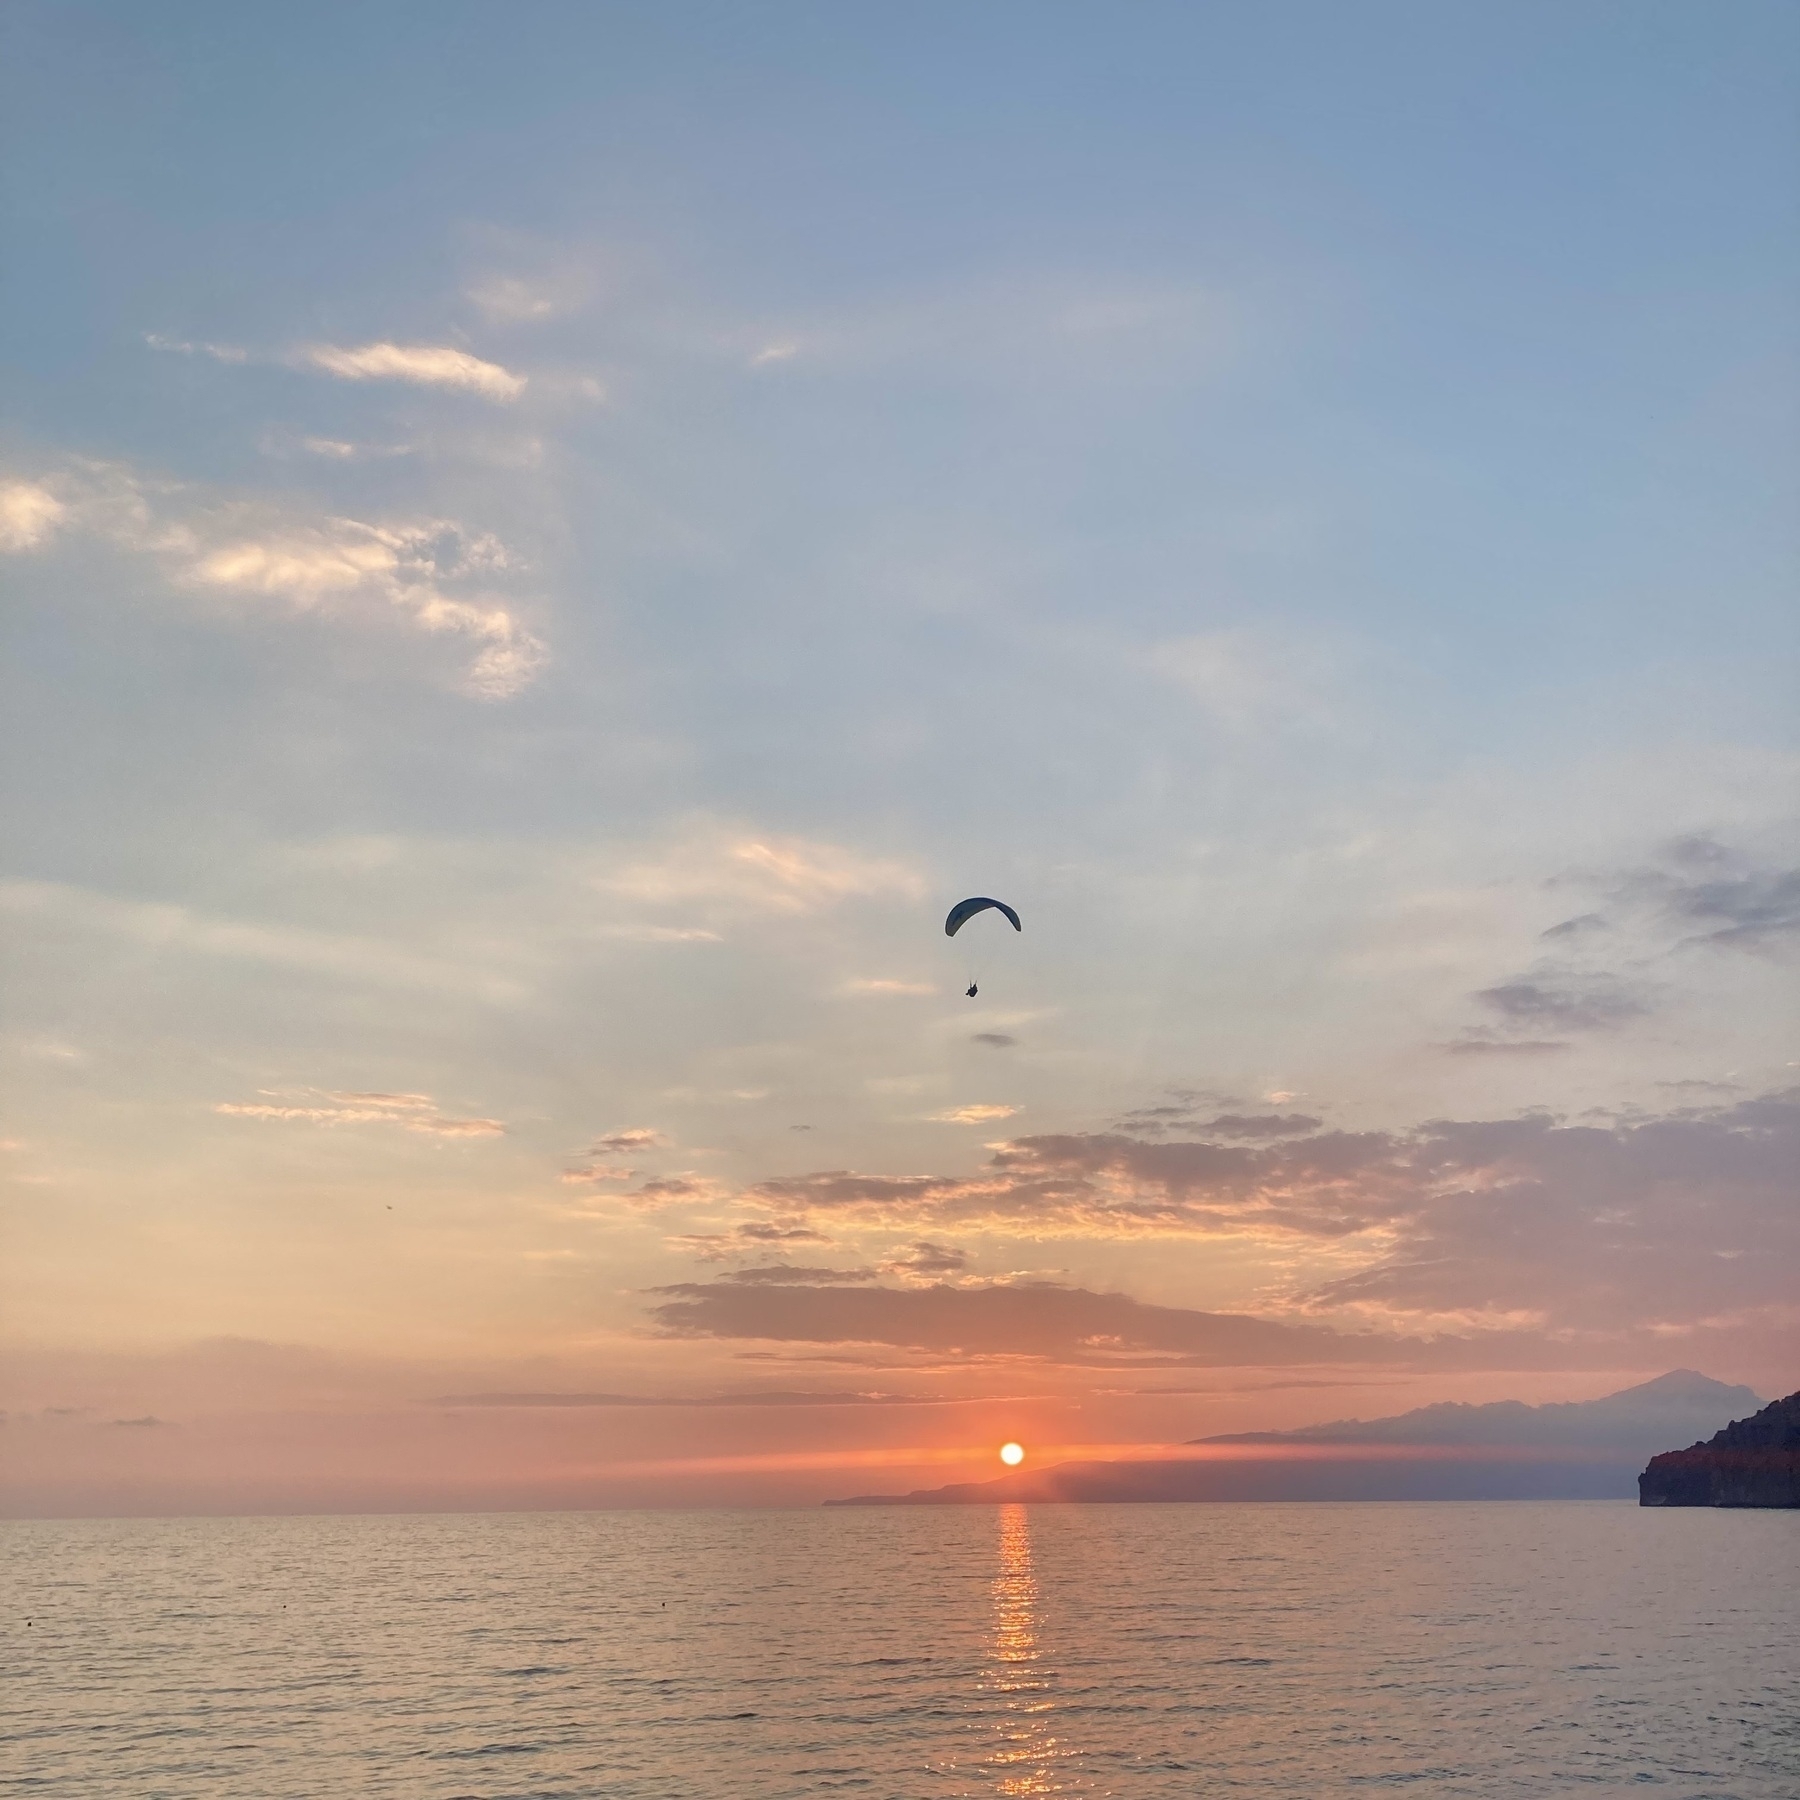 A paraglider descends towards the beach over the sea, with the sun setting behind the shoulder of a mountain in the background